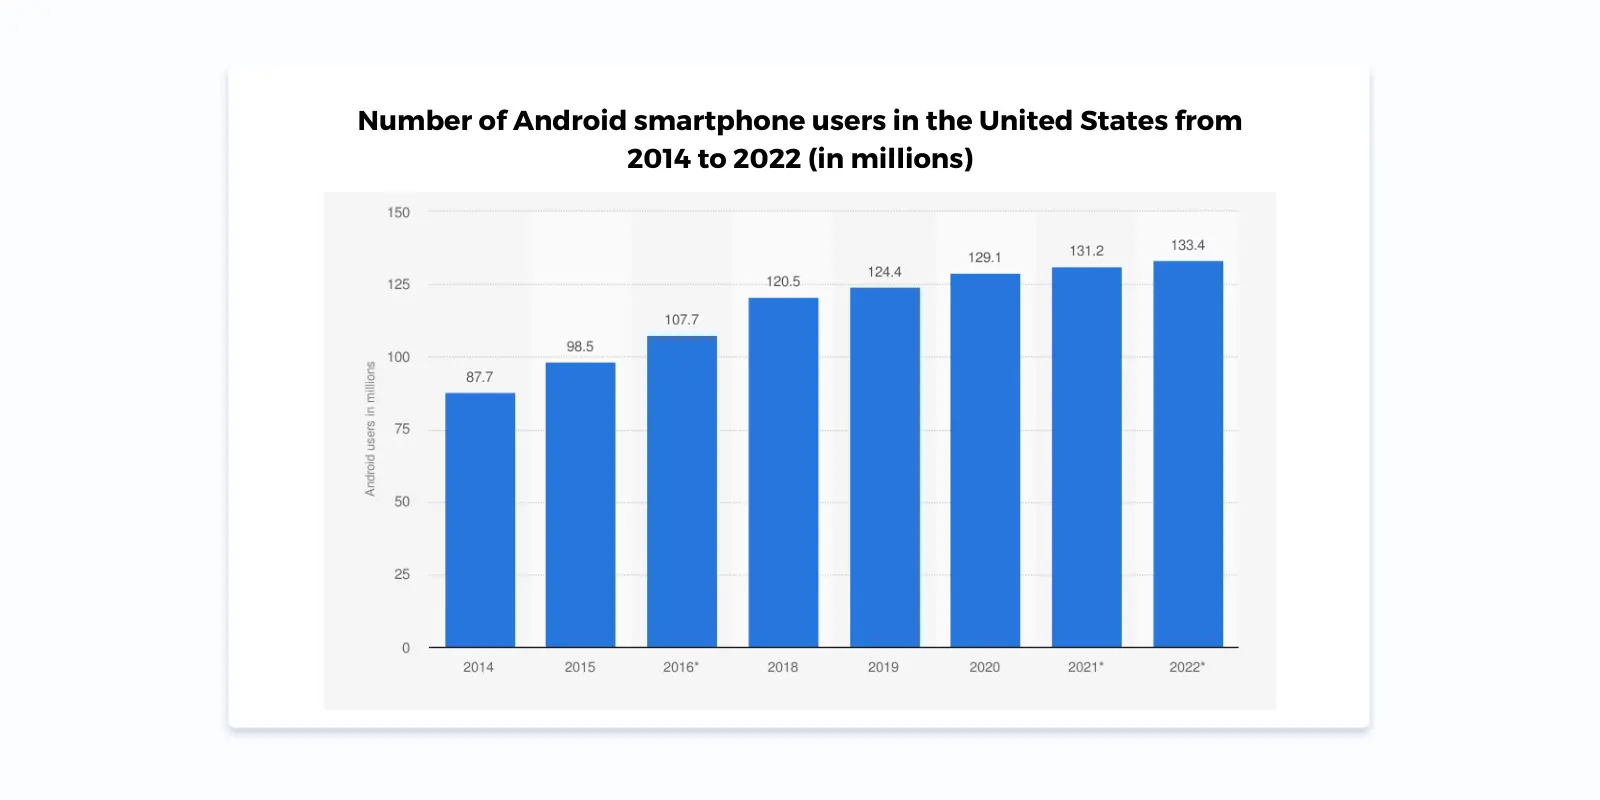 Number of Android smartphone users in the United States from 2014 to 2022 (in millions)